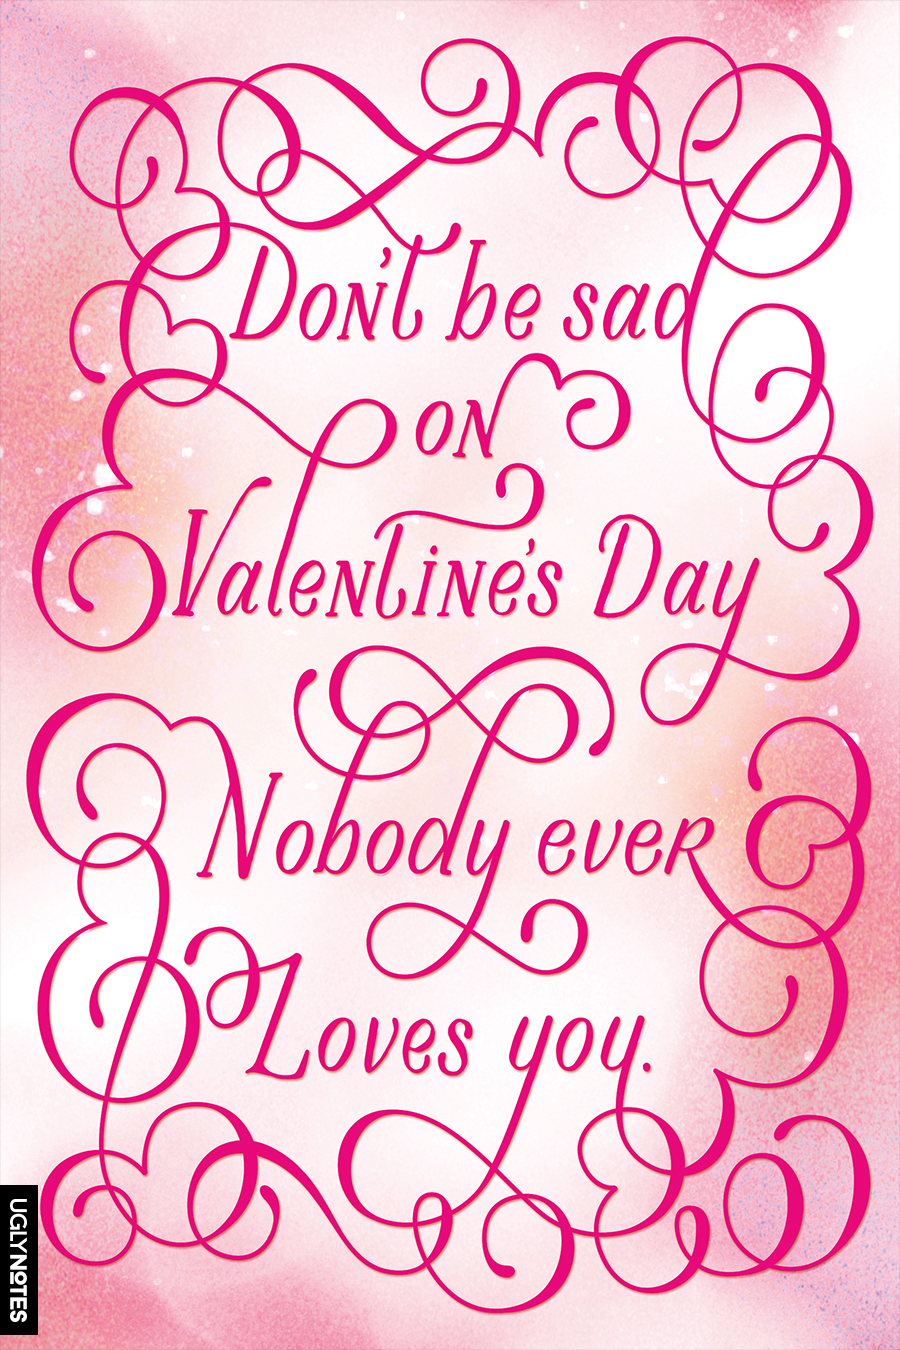 Don't be sad on Valentine's Day. Nobody ever loves you.